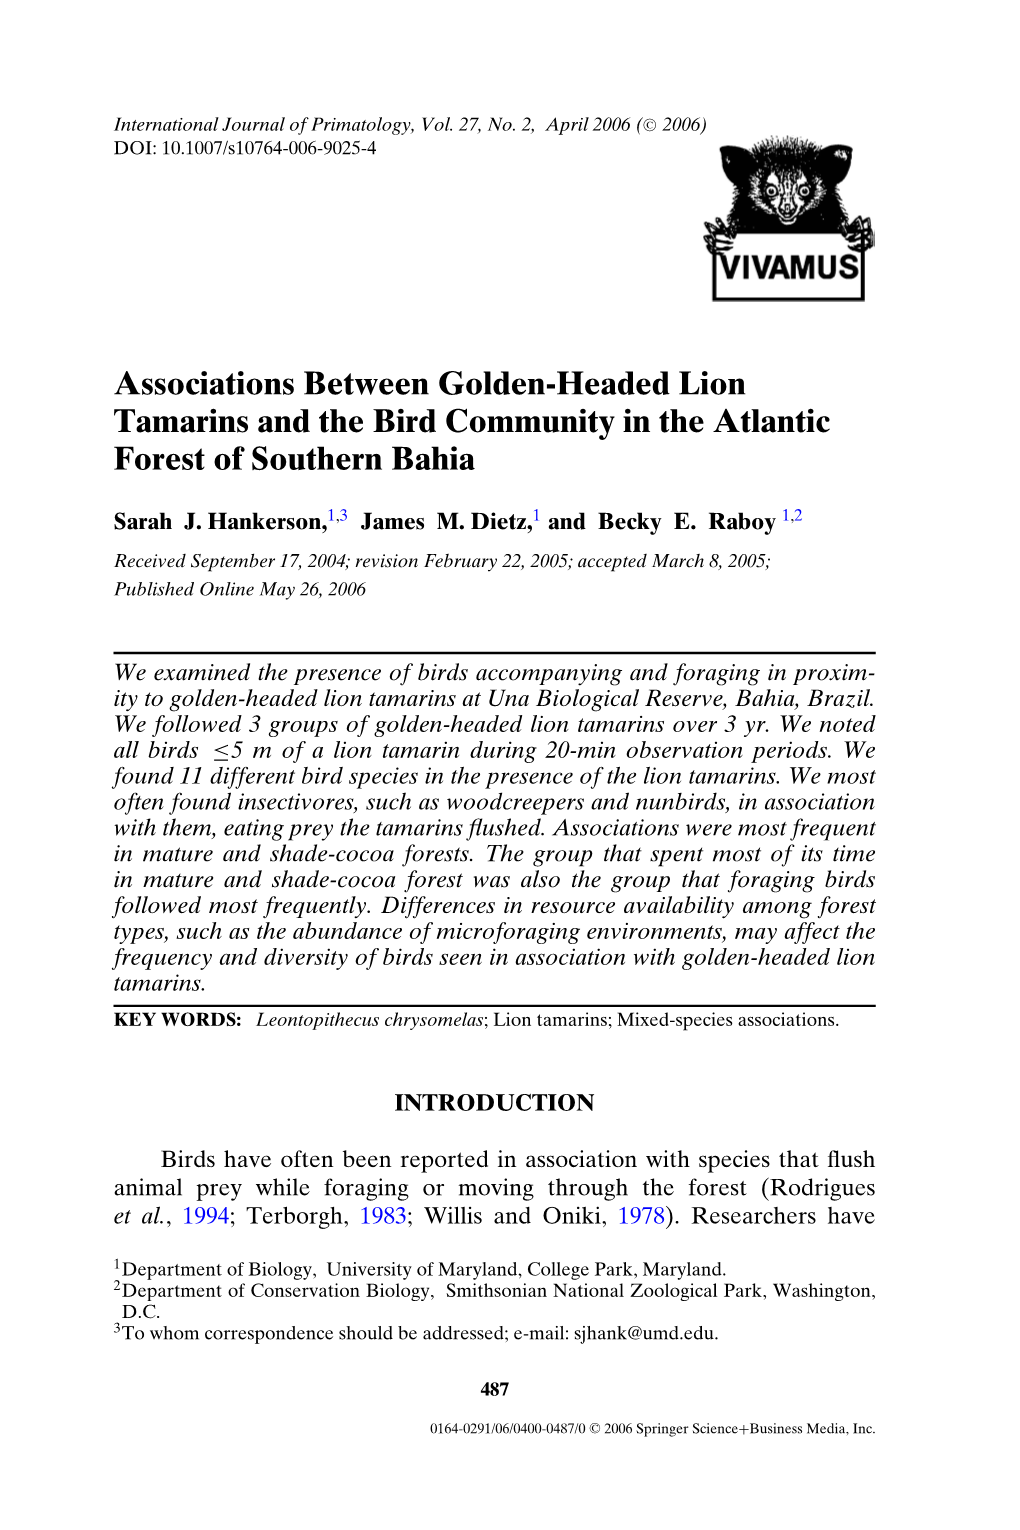 Associations Between Golden-Headed Lion Tamarins and the Bird Community in the Atlantic Forest of Southern Bahia